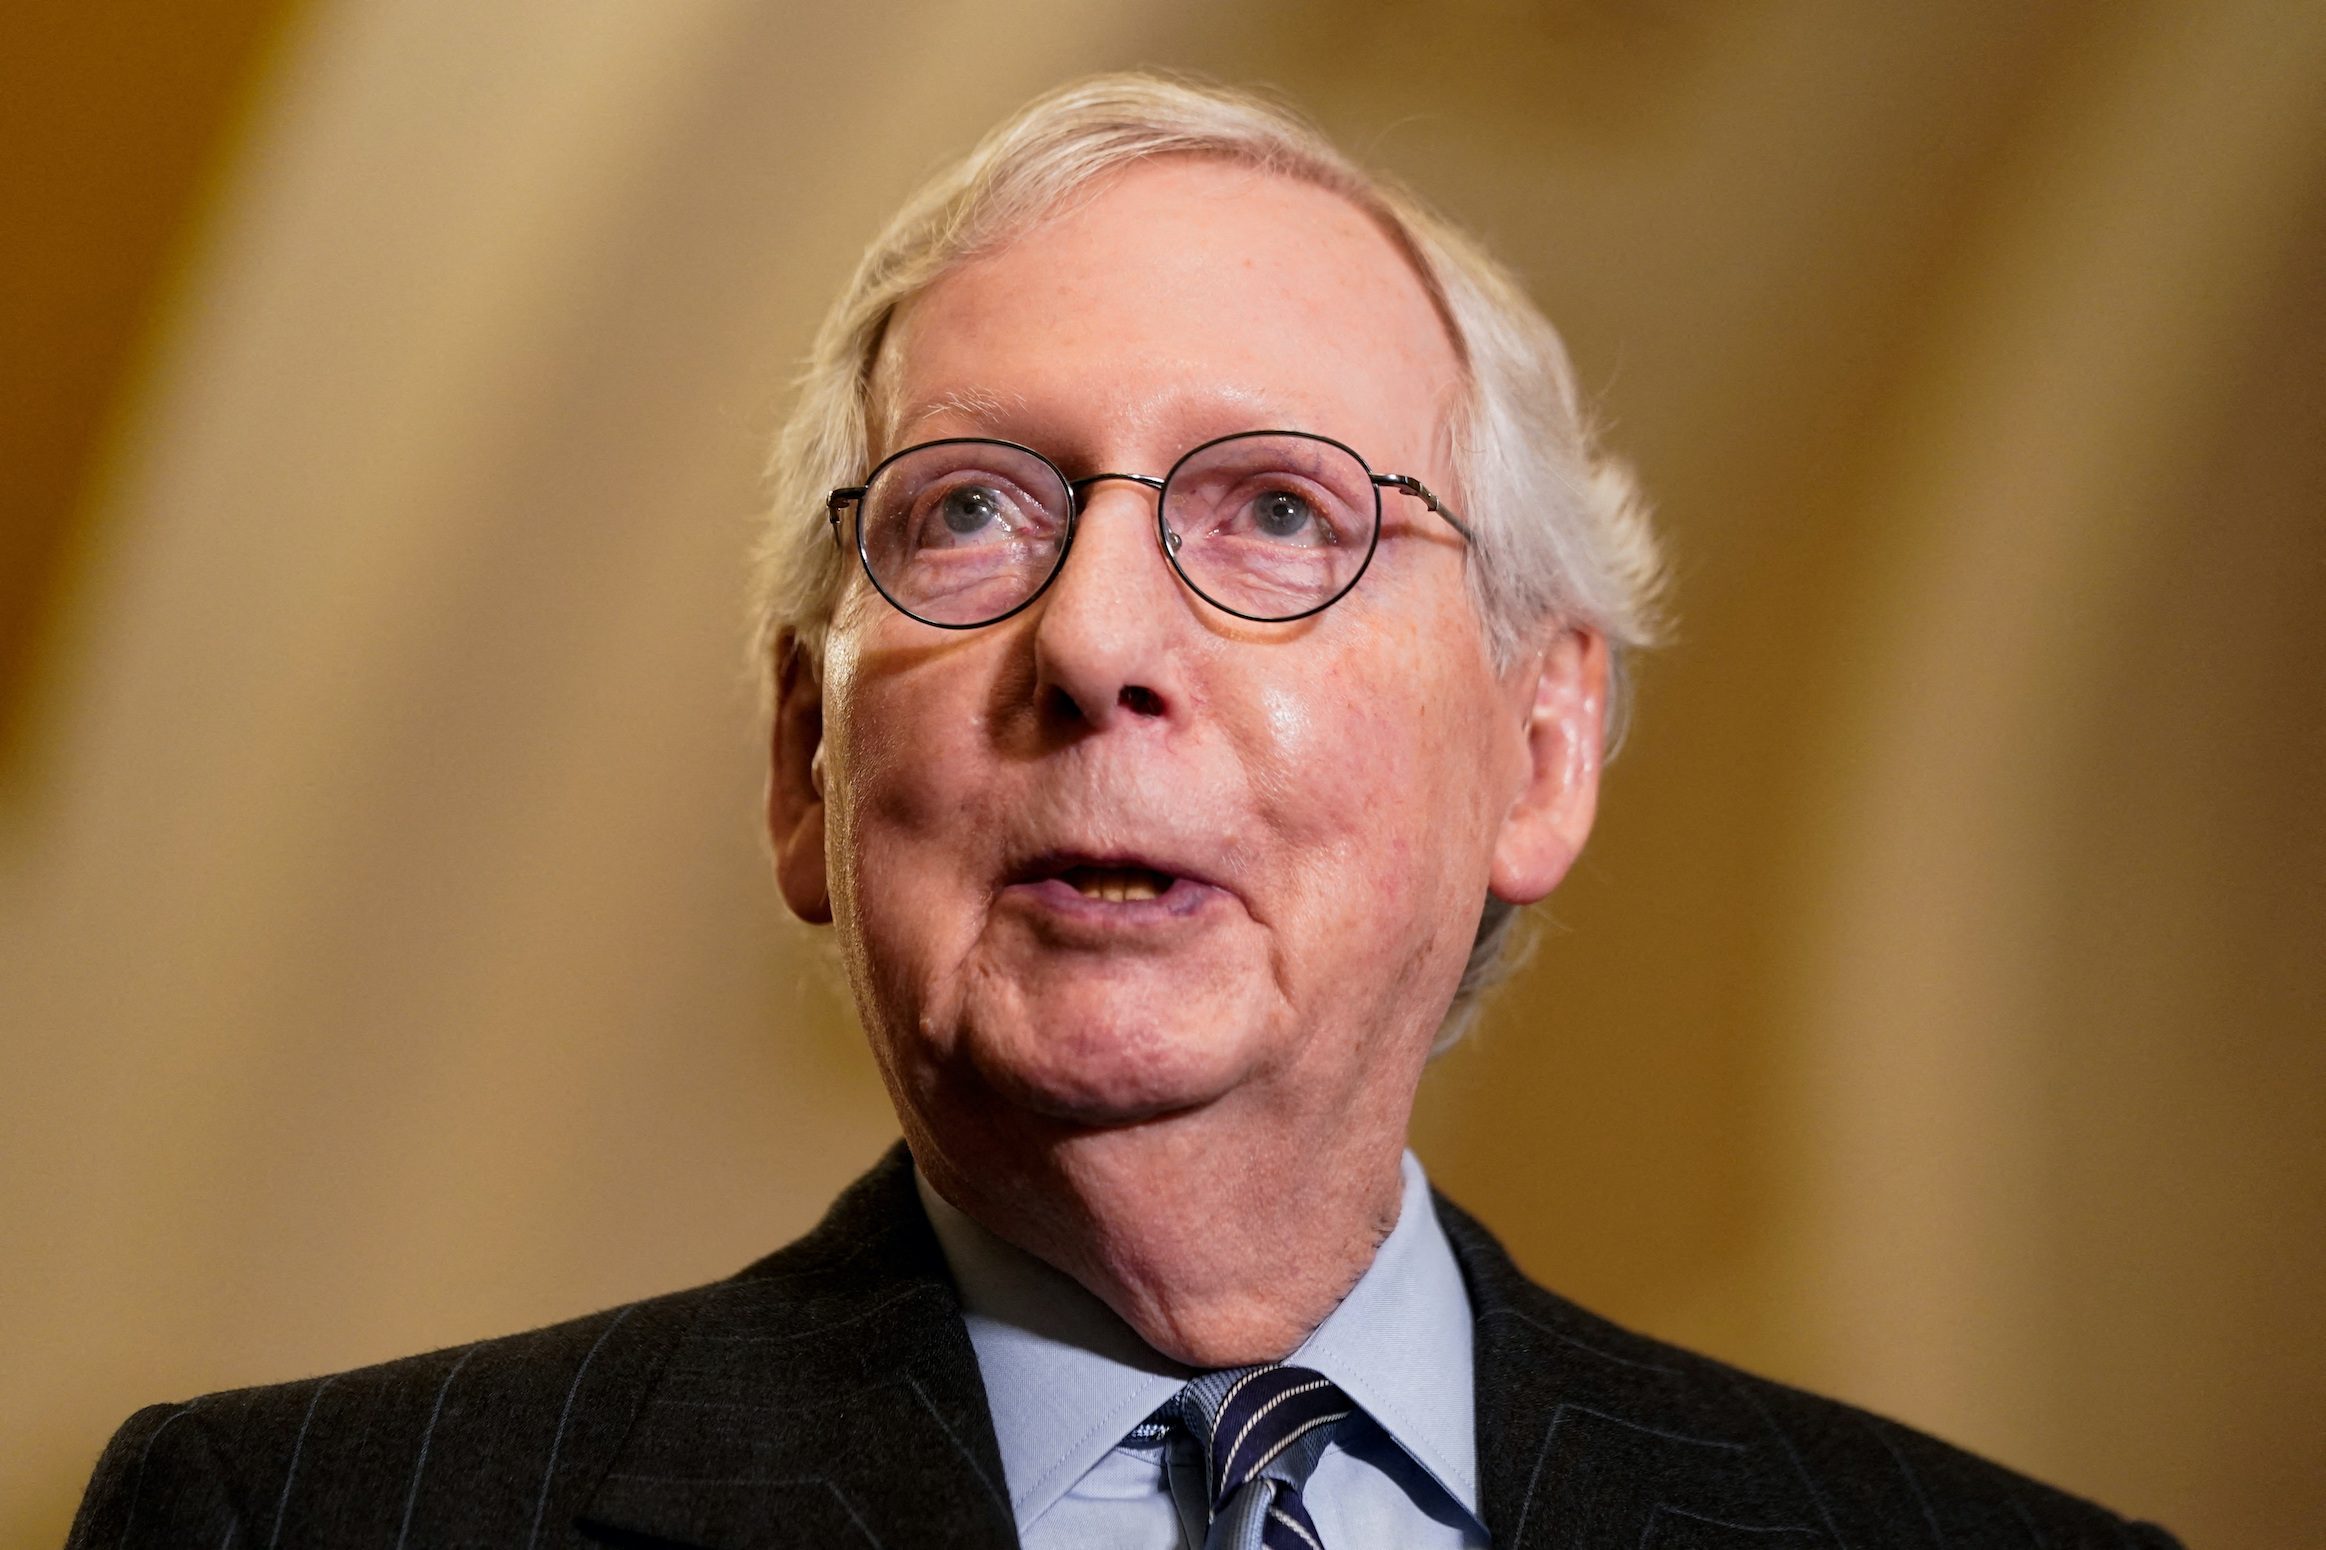 Top US Senate Republican Mitch McConnell hospitalized after fall